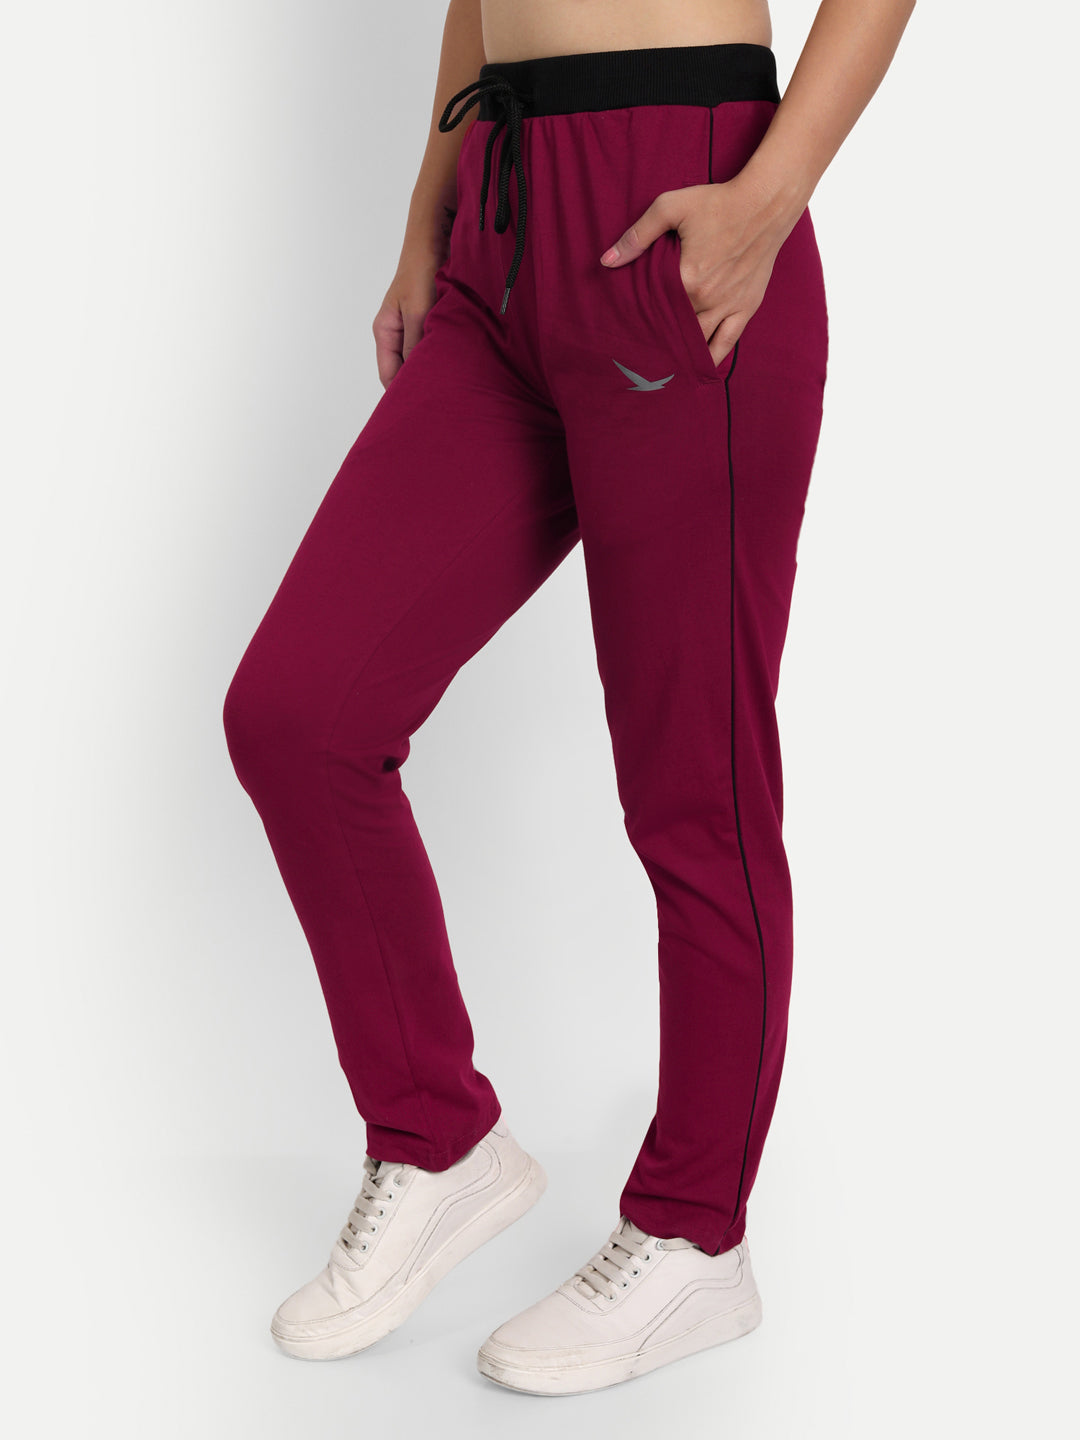 Track Pant for Men And Women in Mumbai at best price by Jai Shankar & Sons  - Justdial